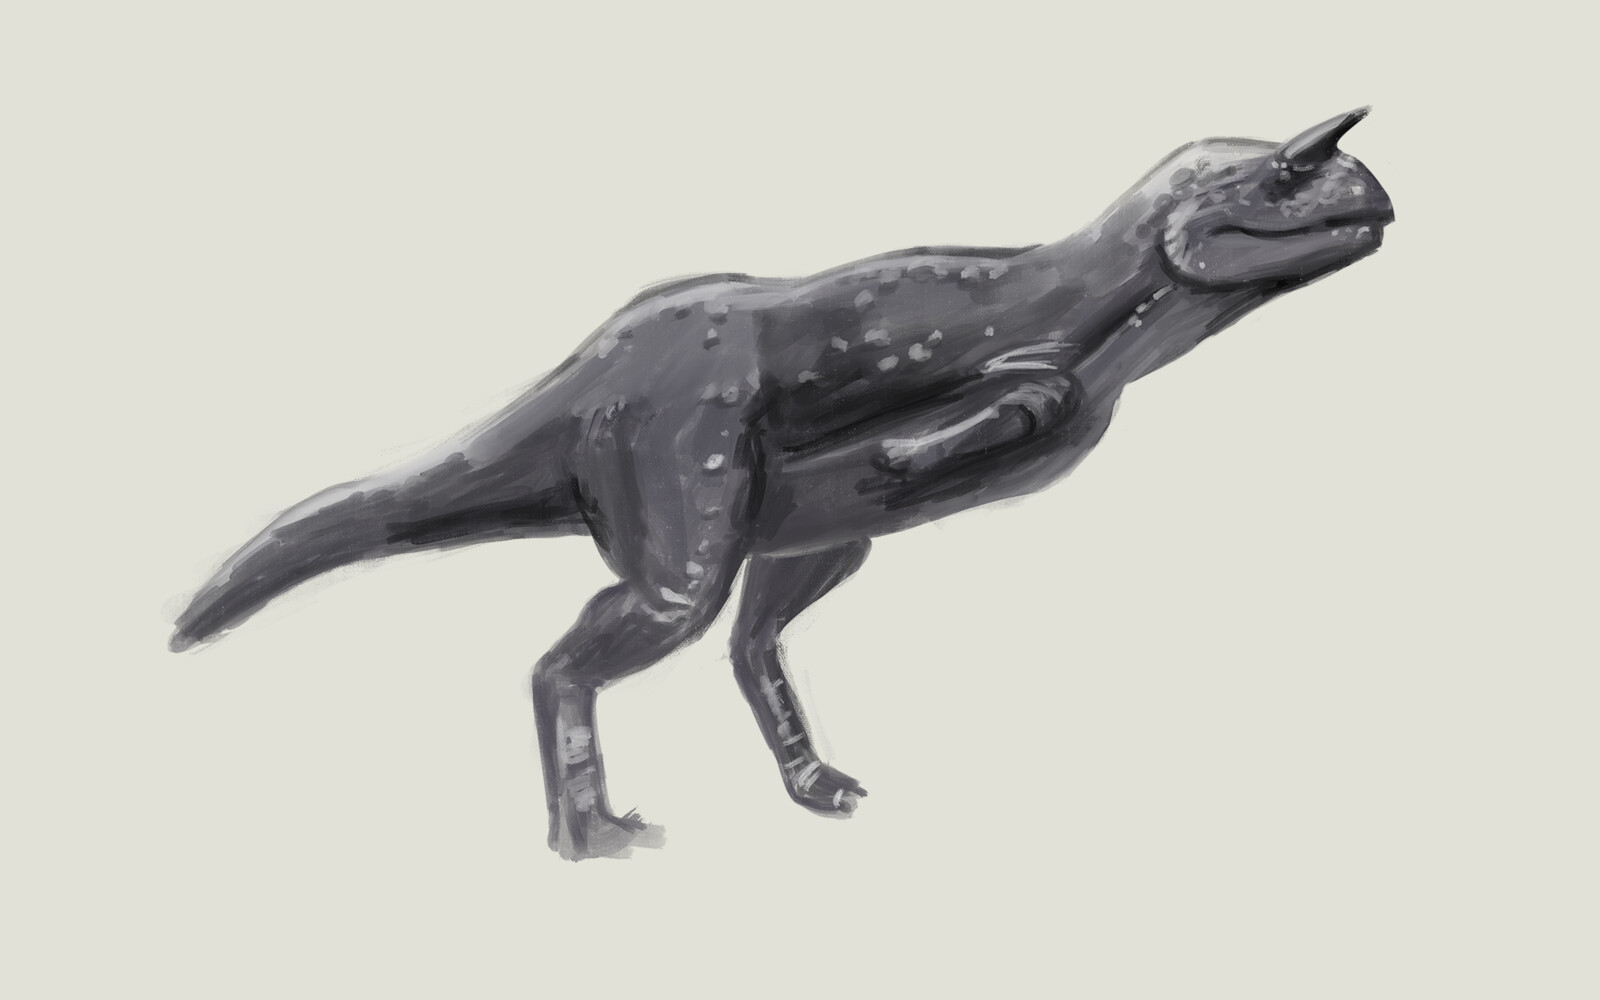 Carno I painted separately on my ipad when the electricity was out. I later dropped it into the painting and worked it into the scene.